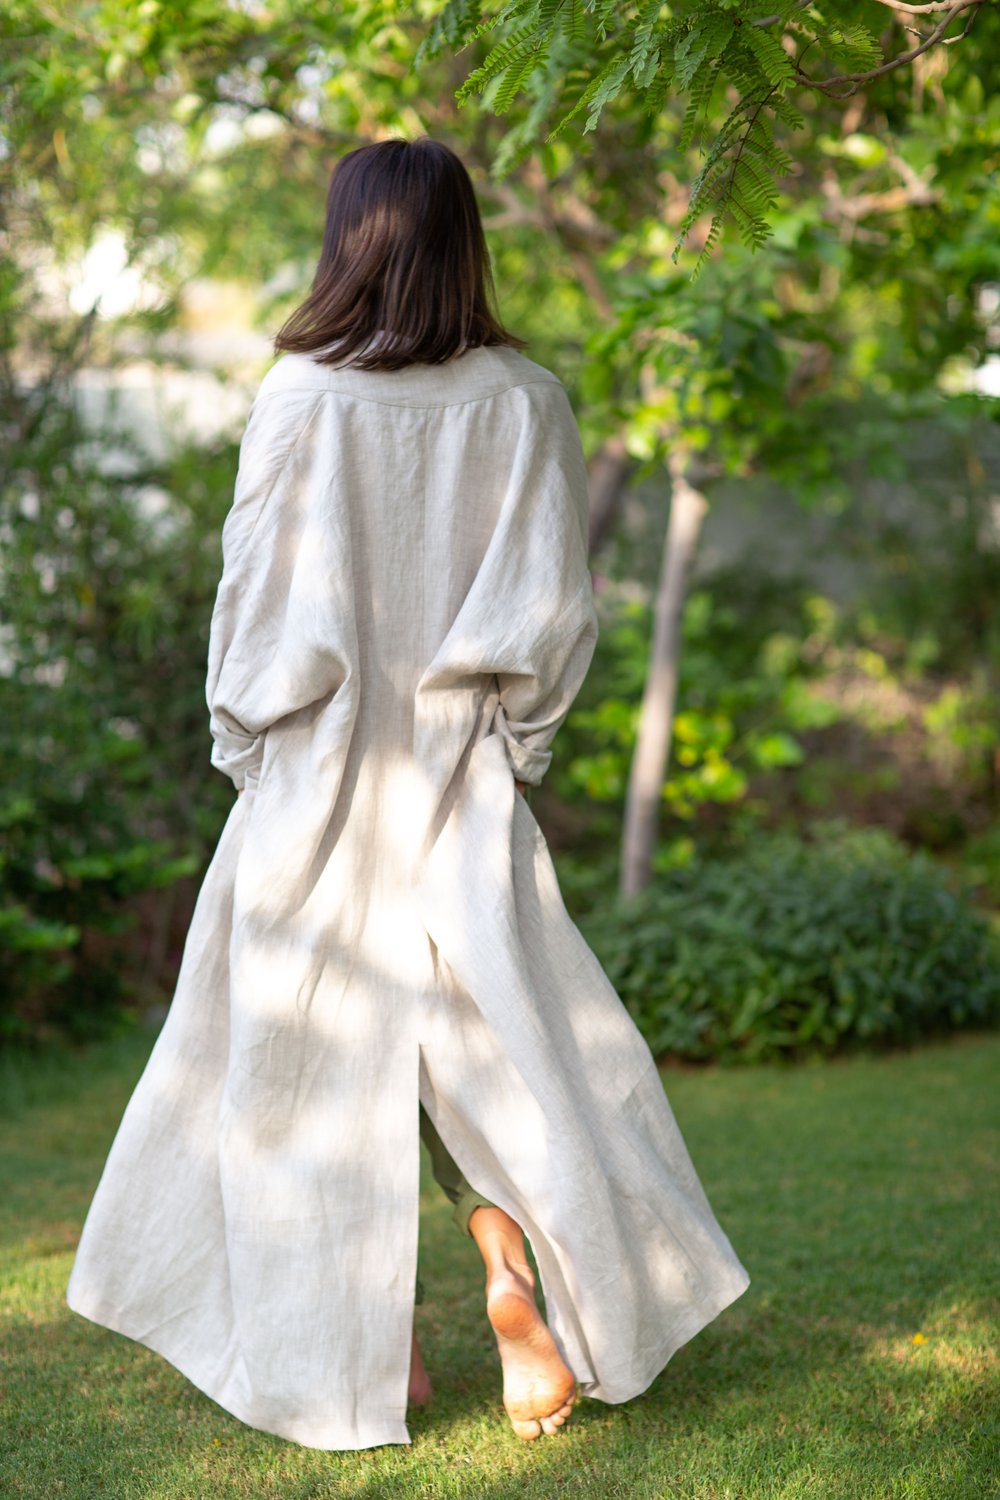 Oatmeal dress with coat - Nature Hedonist